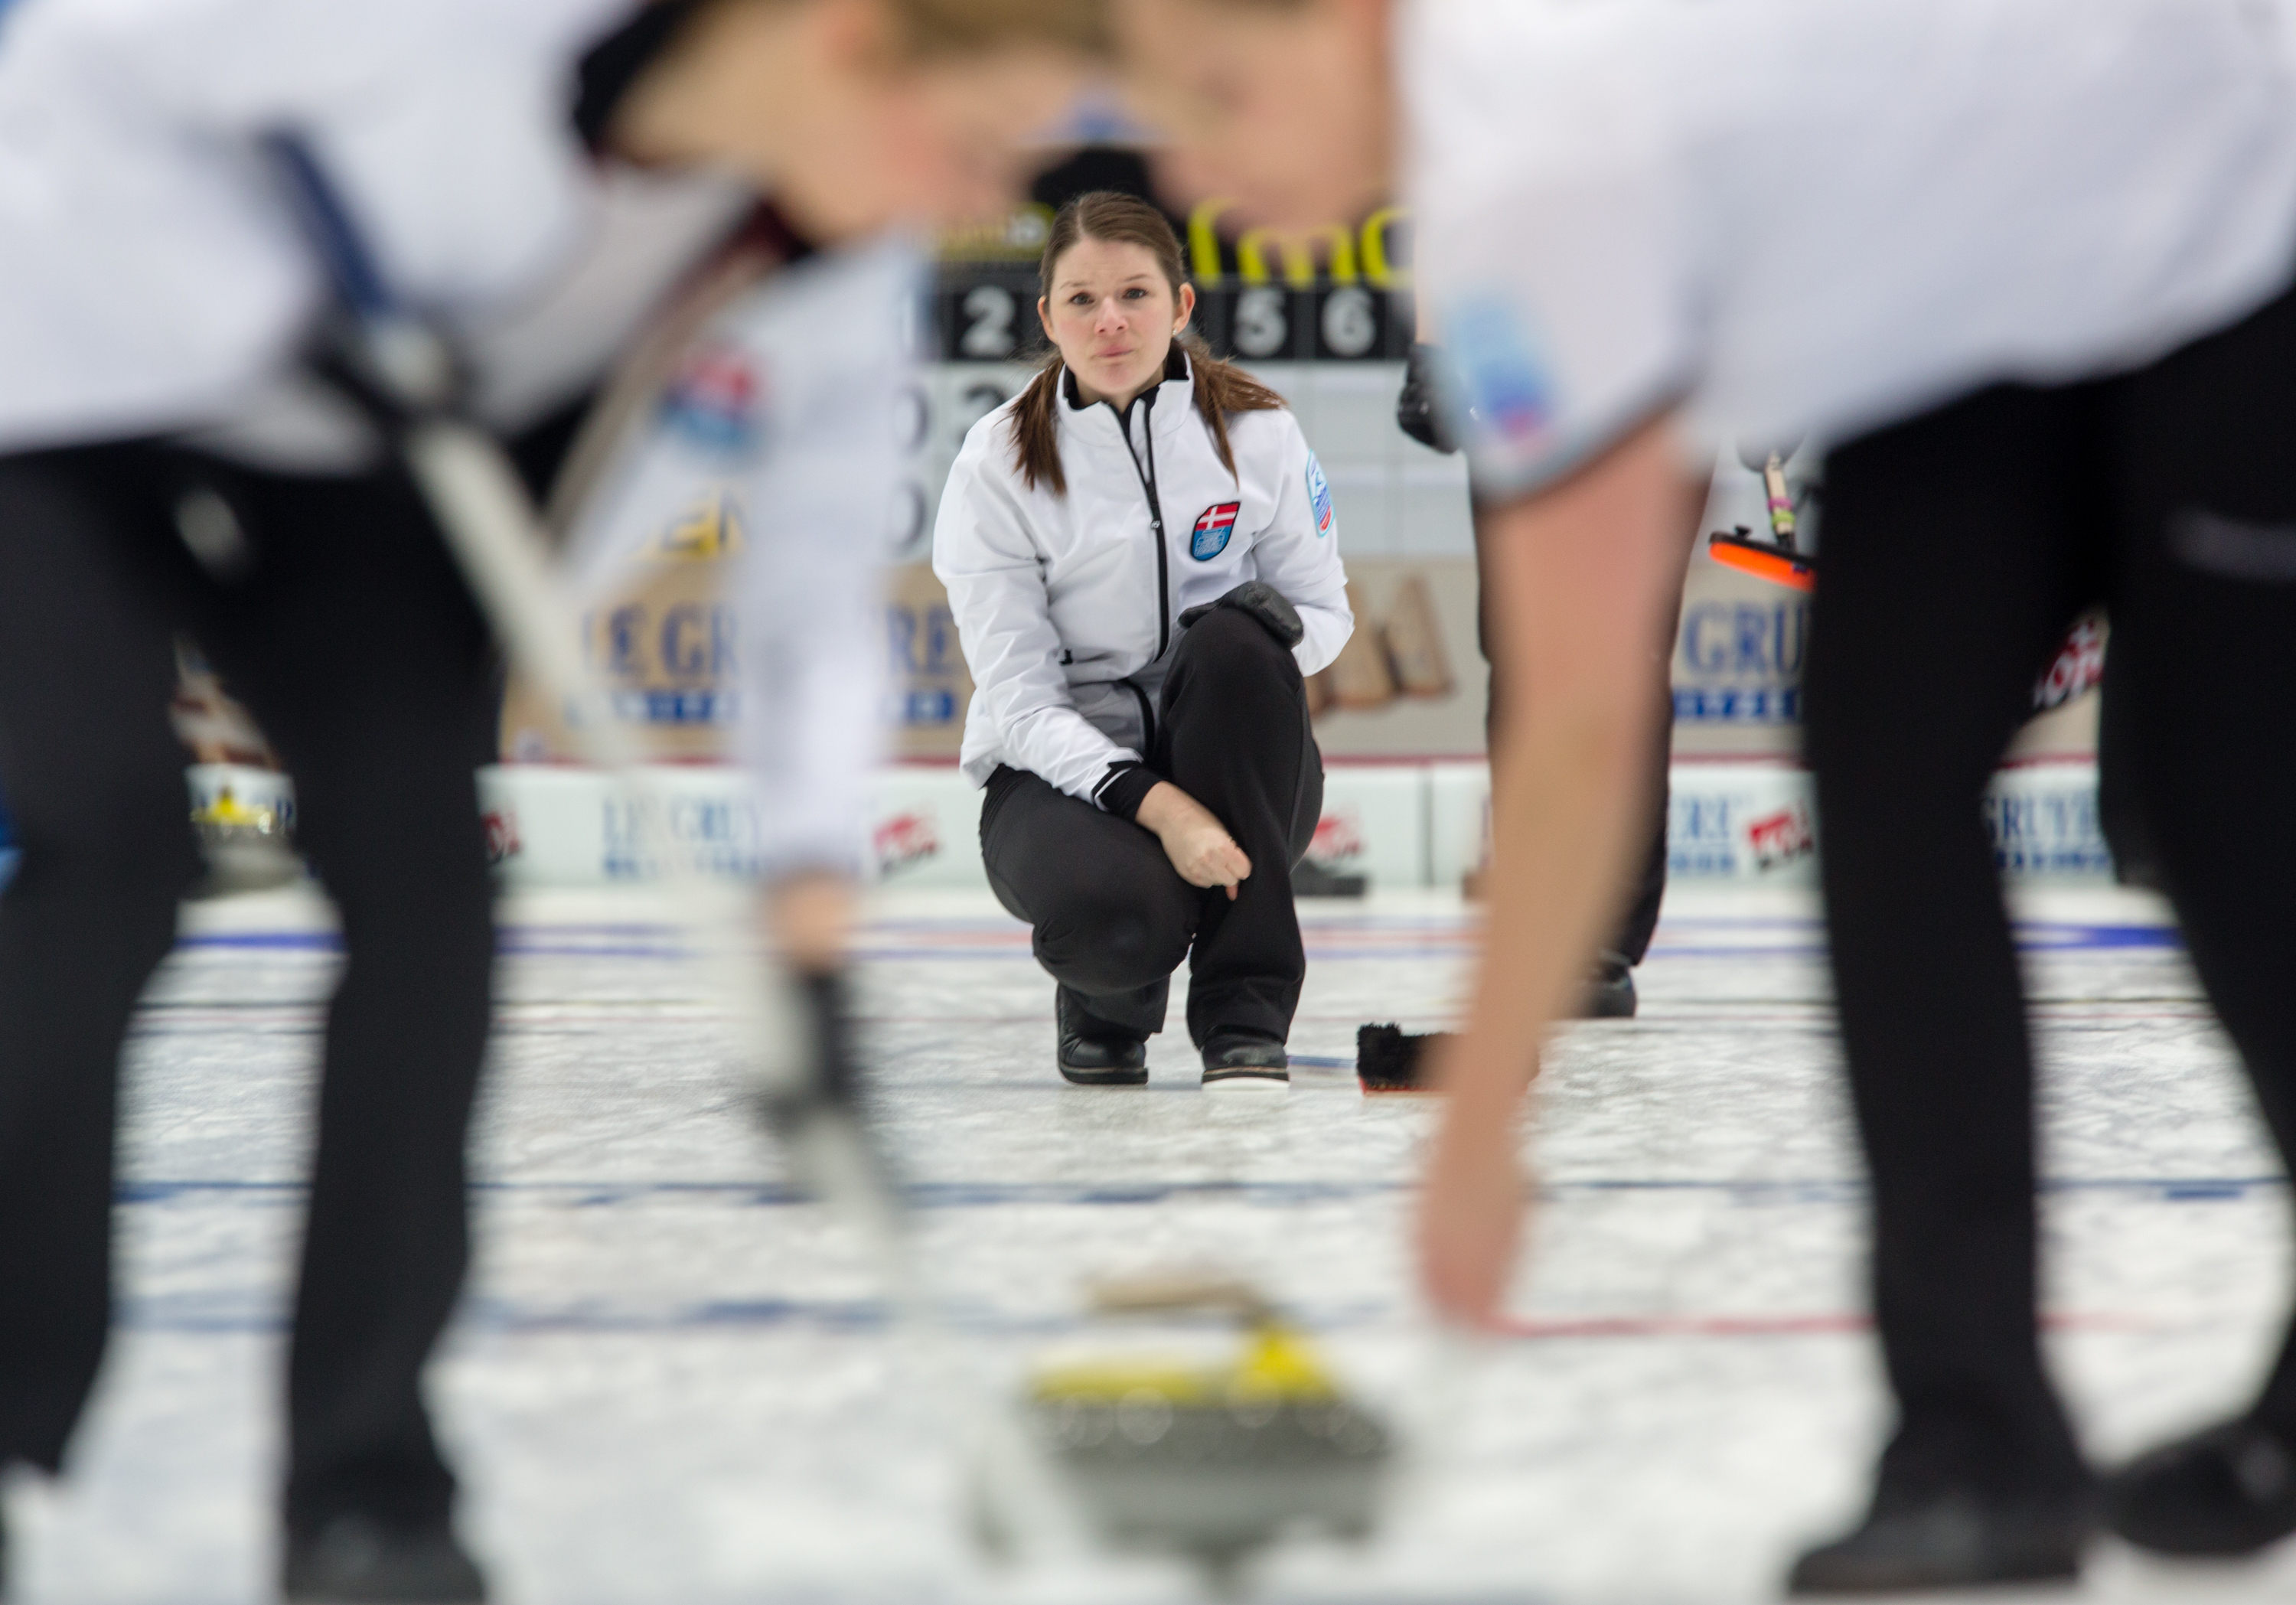 Lene Nielsen, the Denmark Skip, watches a stone she threw travel down the ice at the Le Gruyère European Curling Championships on 11/23/2014. Denmark ended up in 4th place after losing to Scotland 8 to 4 in the bronze medal game.